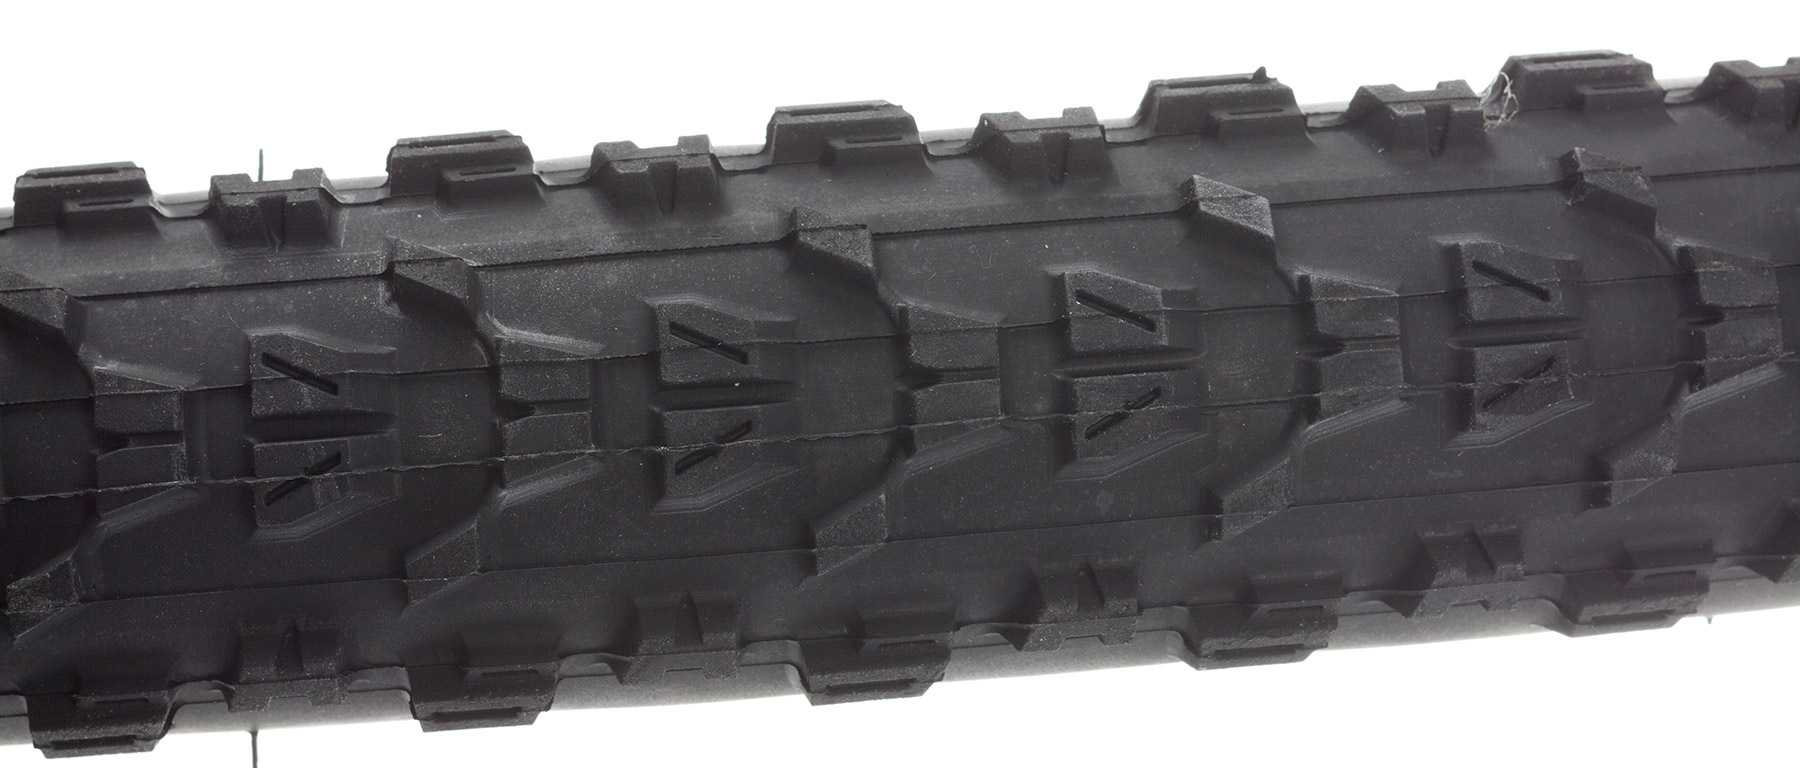 Maxxis Ardent EXO TR Tubeless Tire